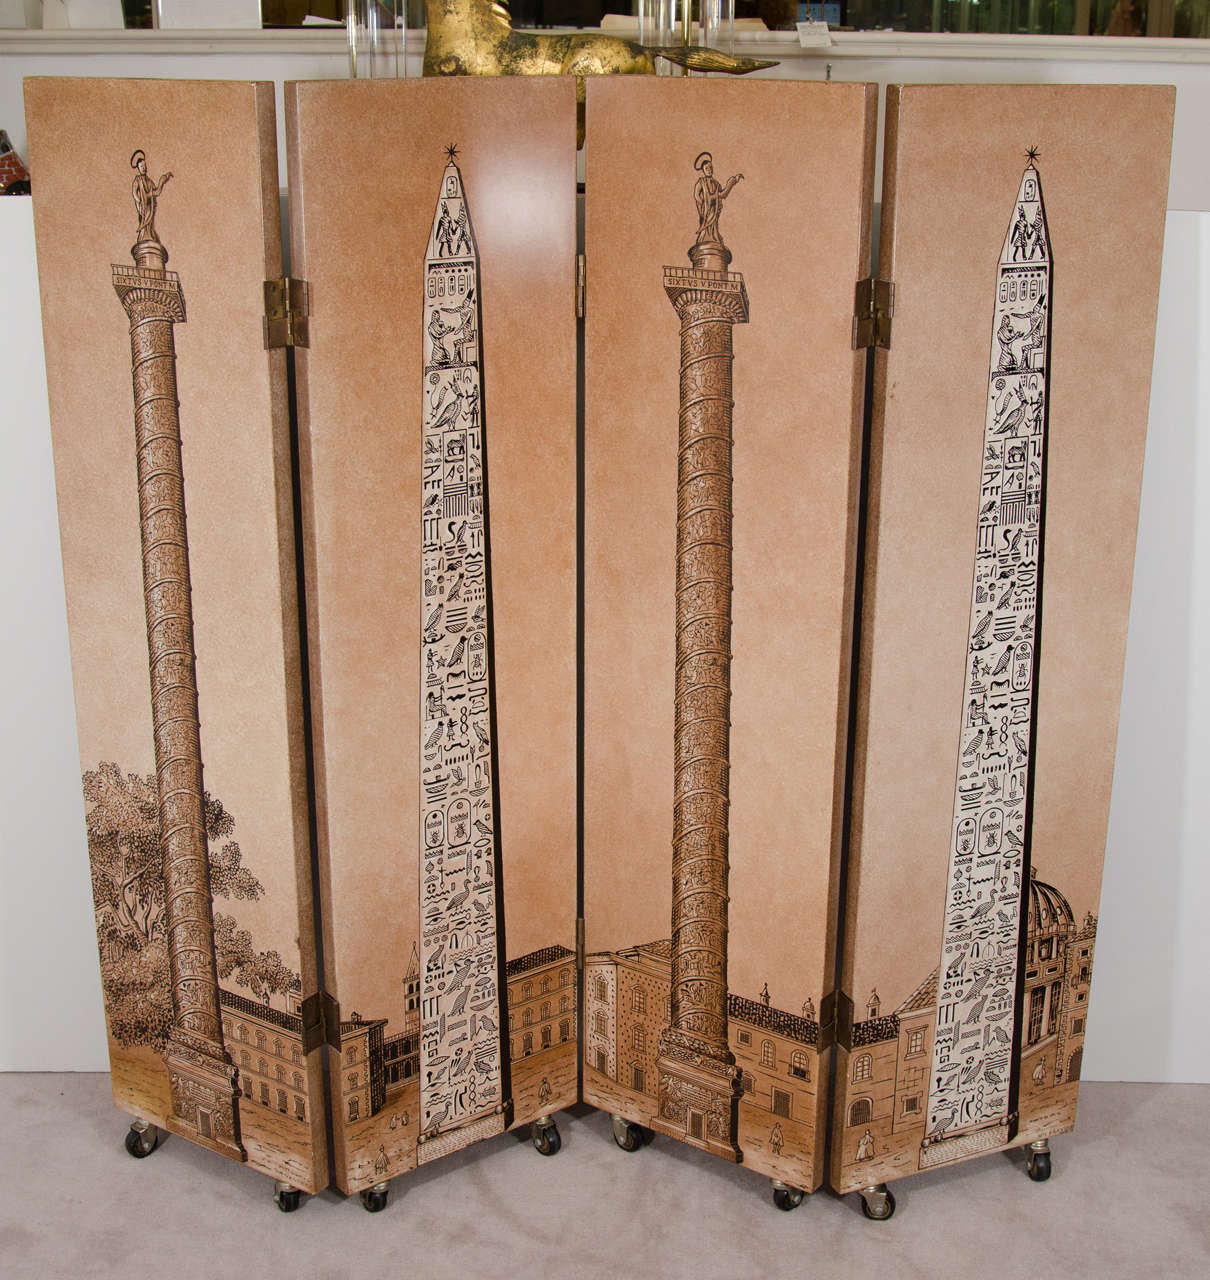 A 20th century four-panel screen or room divider on casters by Fornasetti with scenes of obelisks with hieroglyphics and saints on top of columns. Retains its original label.

Good vintage condition with age appropriate wear. Some chips to lacquer.